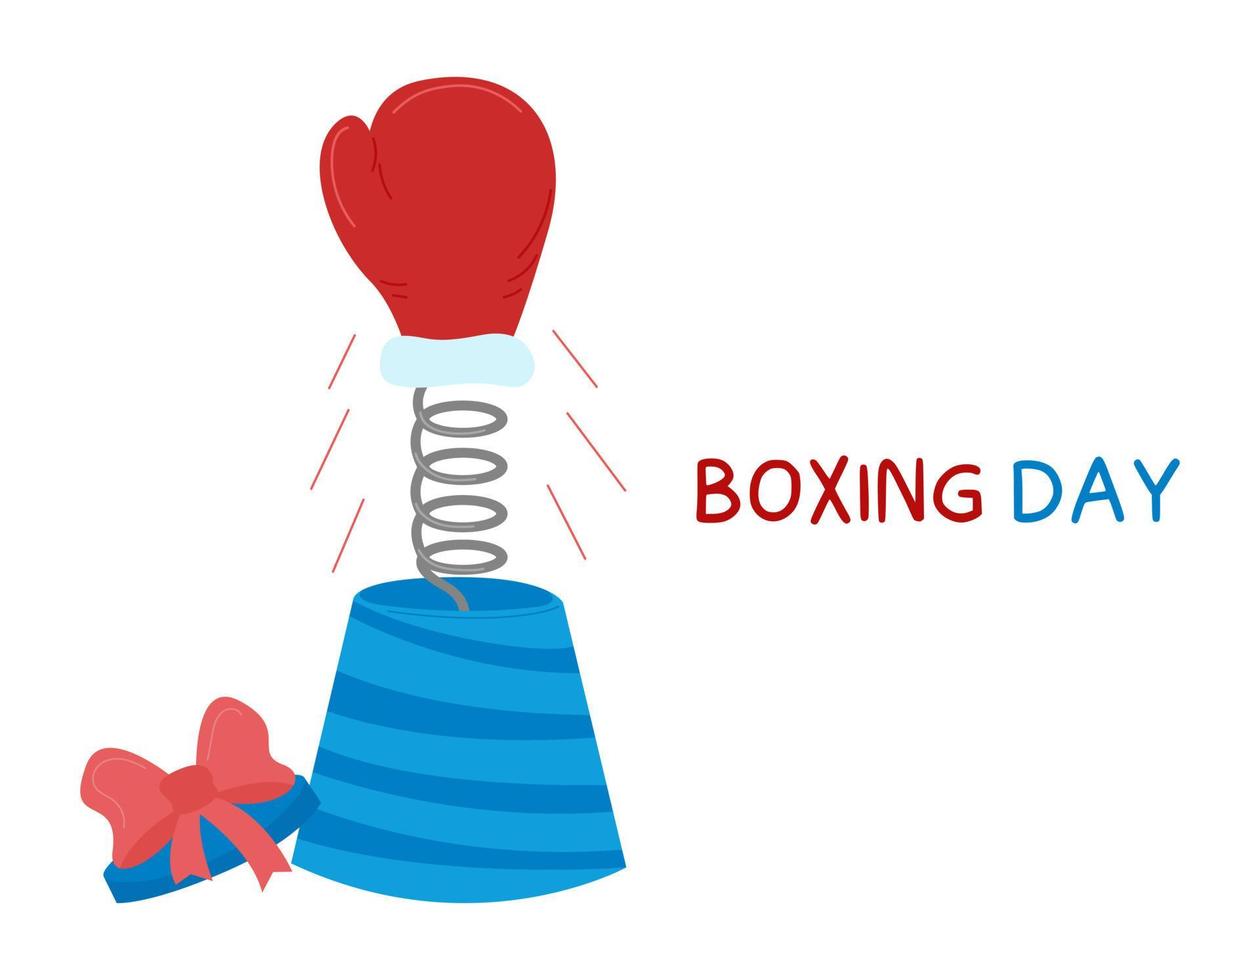 Boxing day. Vector illustration. Boxing glove on spring popping up of gift box.